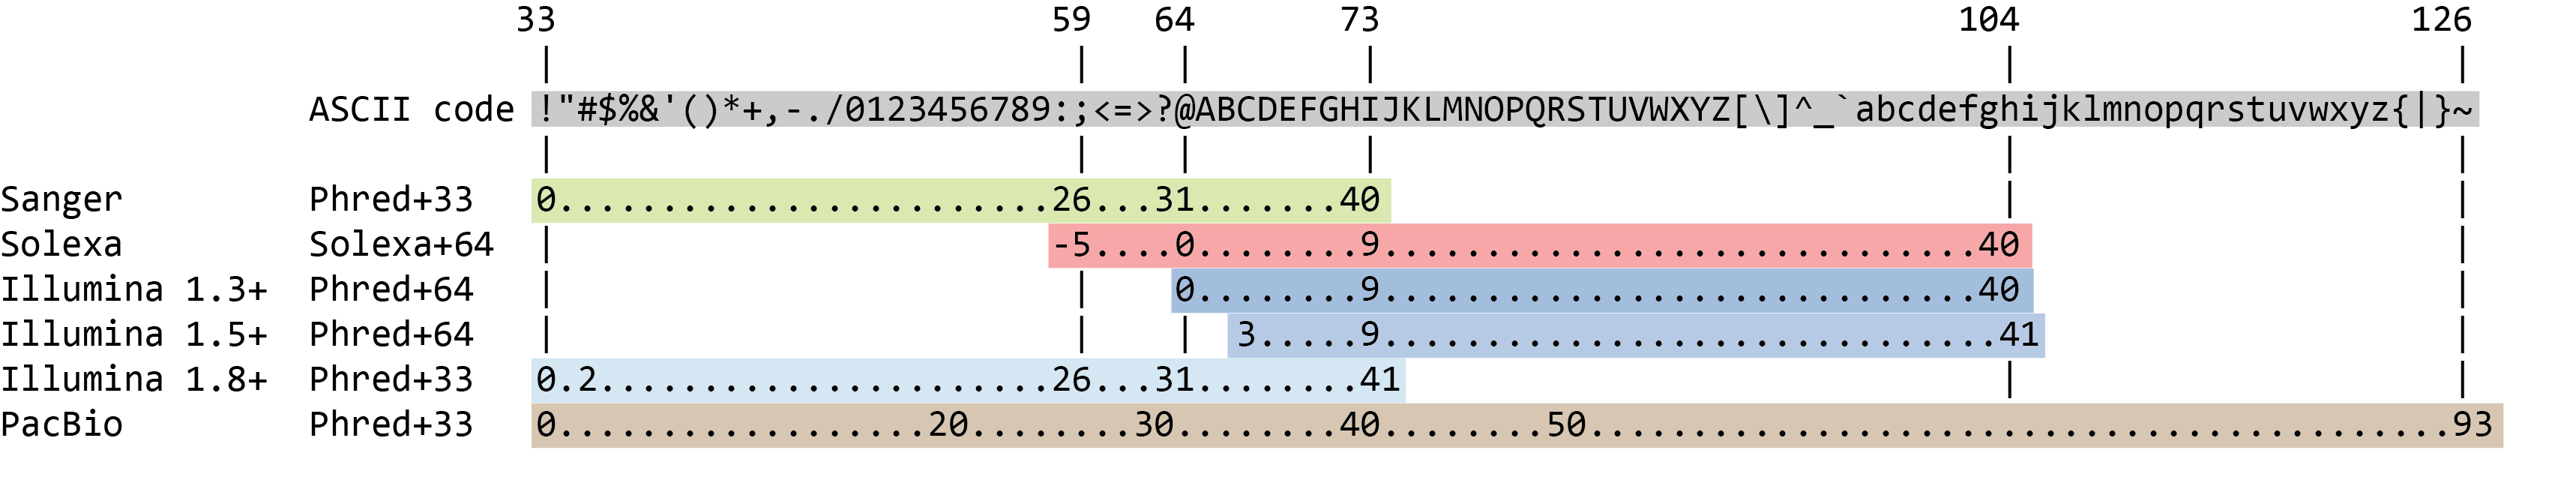 Encoding of the quality score with ASCII characters for different Phred encoding. The ascii code sequence is shown at the top with symbols for 33 to 64, upper case letters, more symbols, and then lowercase letters. Sanger maps from 33 to 73 while solexa is shifted, starting at 59 and going to 104. Illumina 1.3 starts at 54 and goes to 104, Illumina 1.5 is shifted three scores to the right but still ends at 104. Illumina 1.8+ goes back to the Sanger except one single score wider. Illumina. 